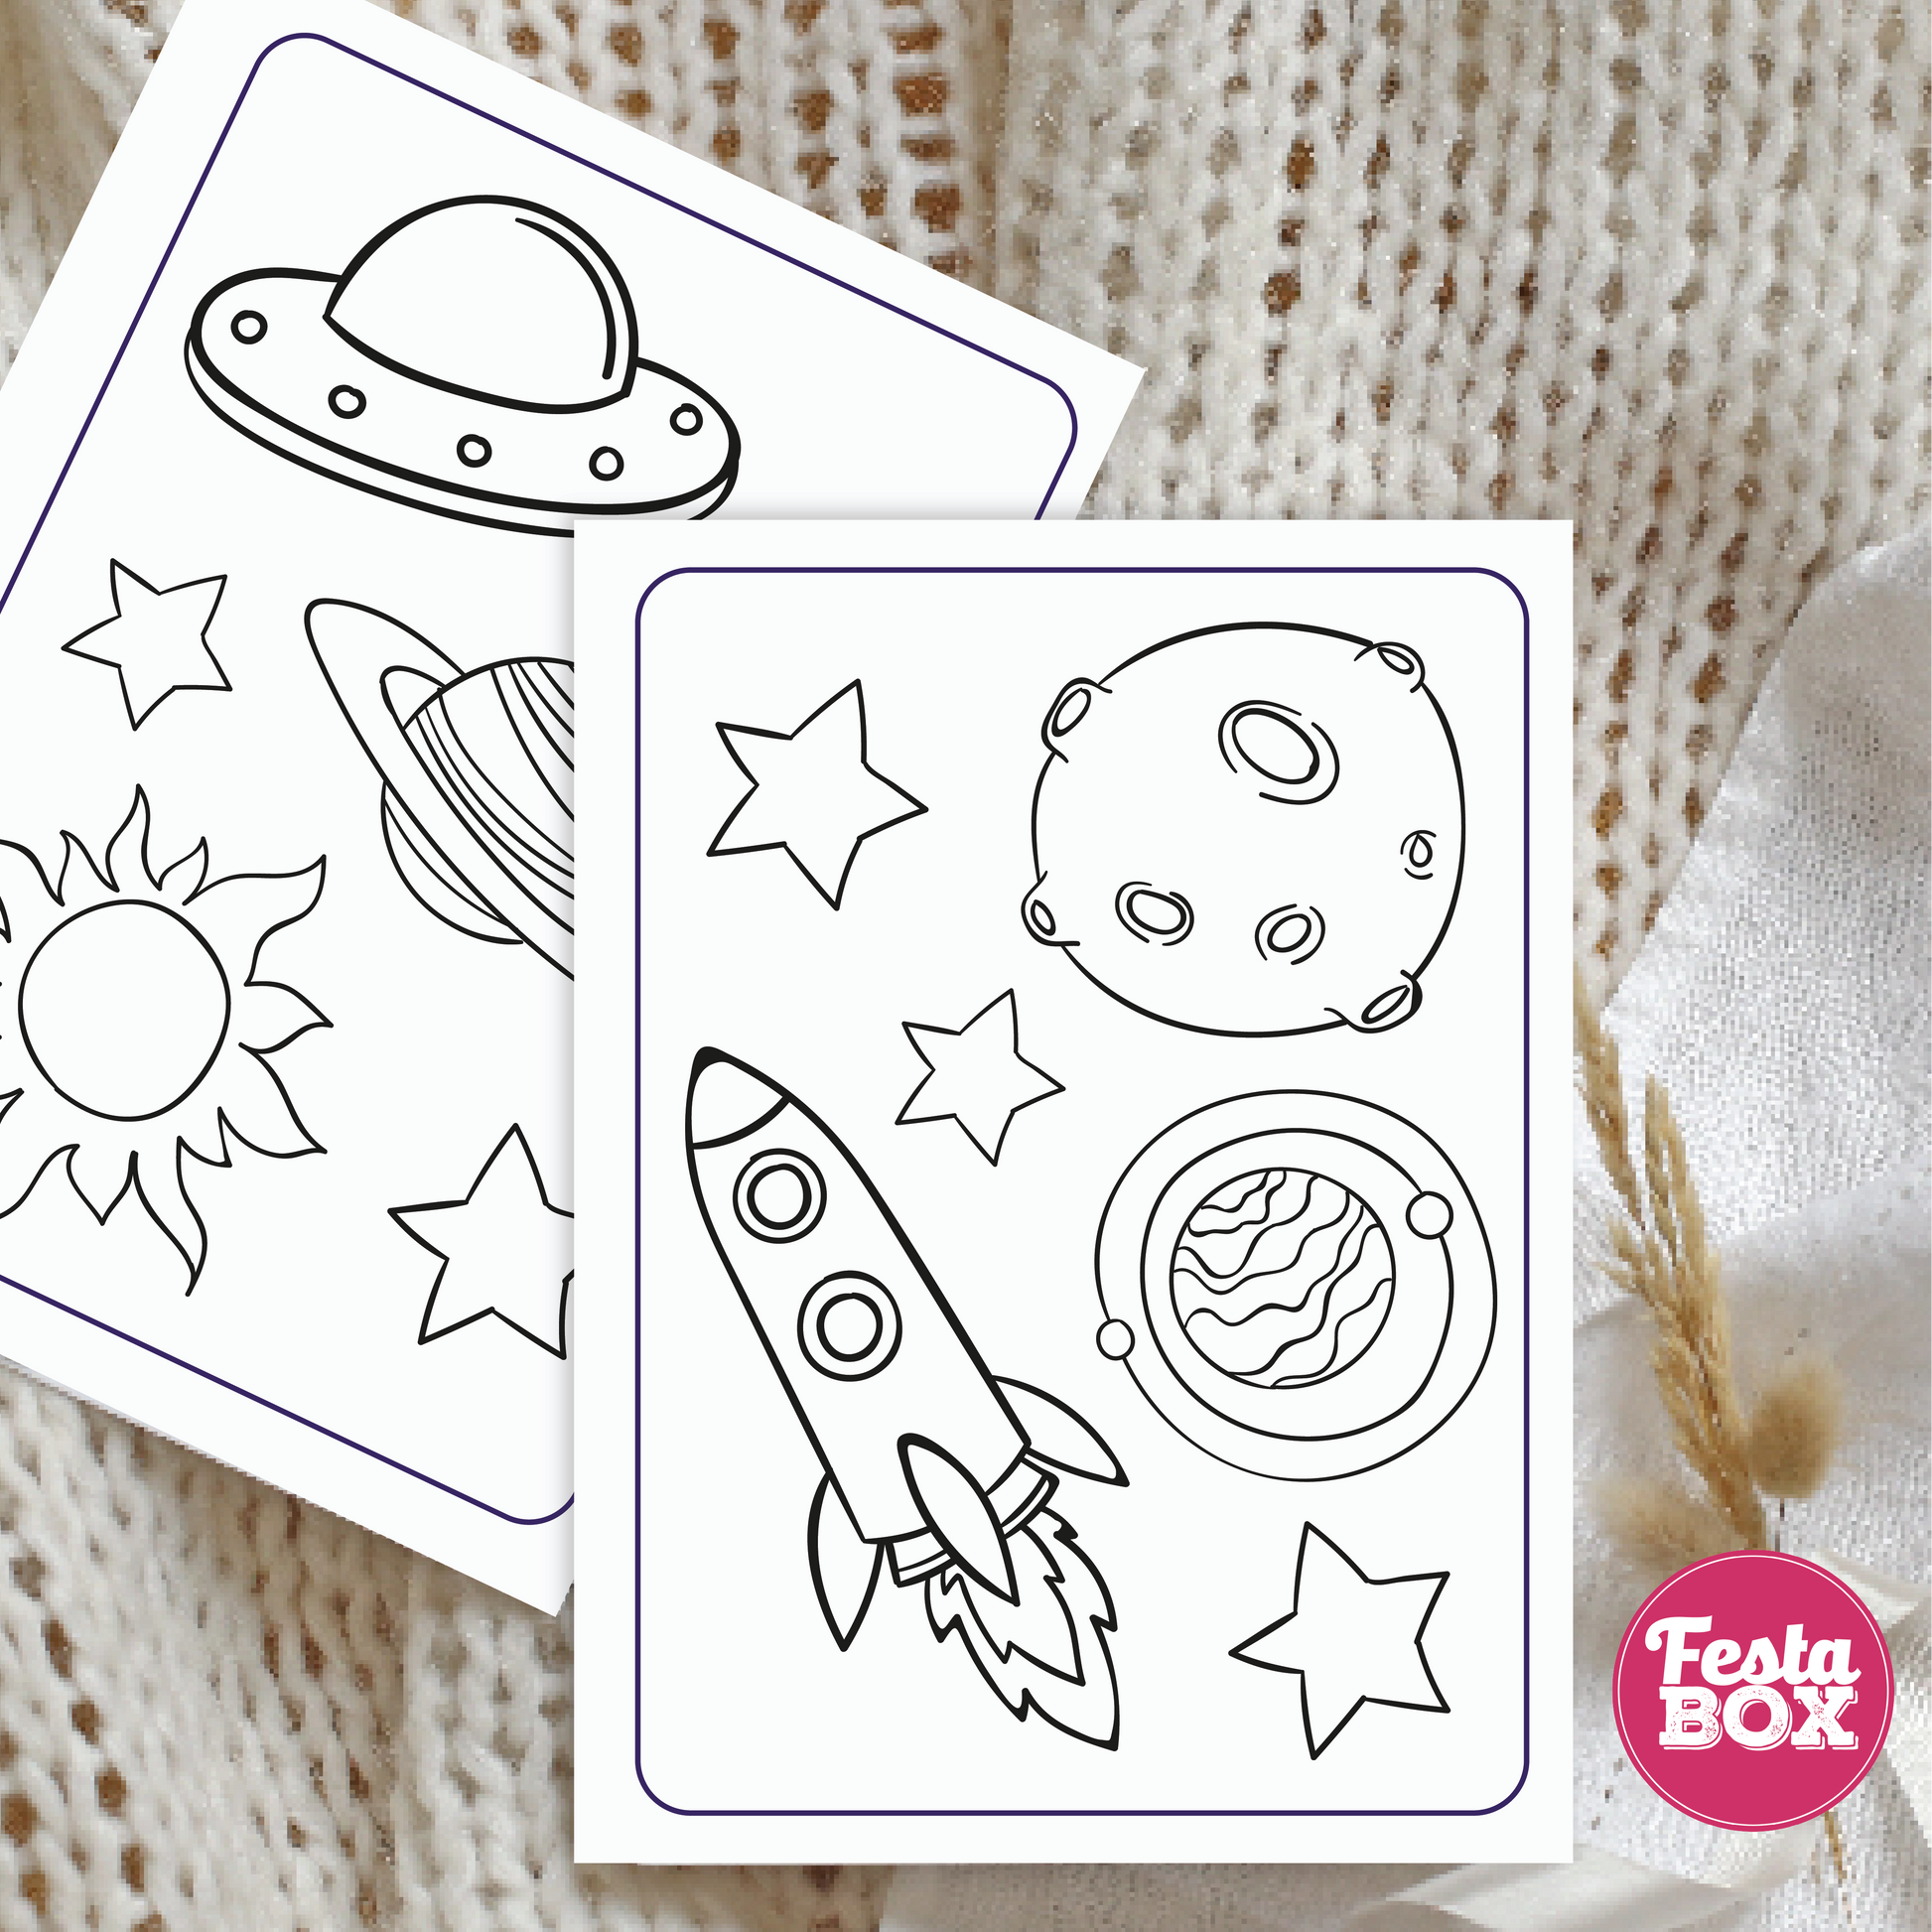 These colouring sheets are a part of the Space Theme Collection by Festabox